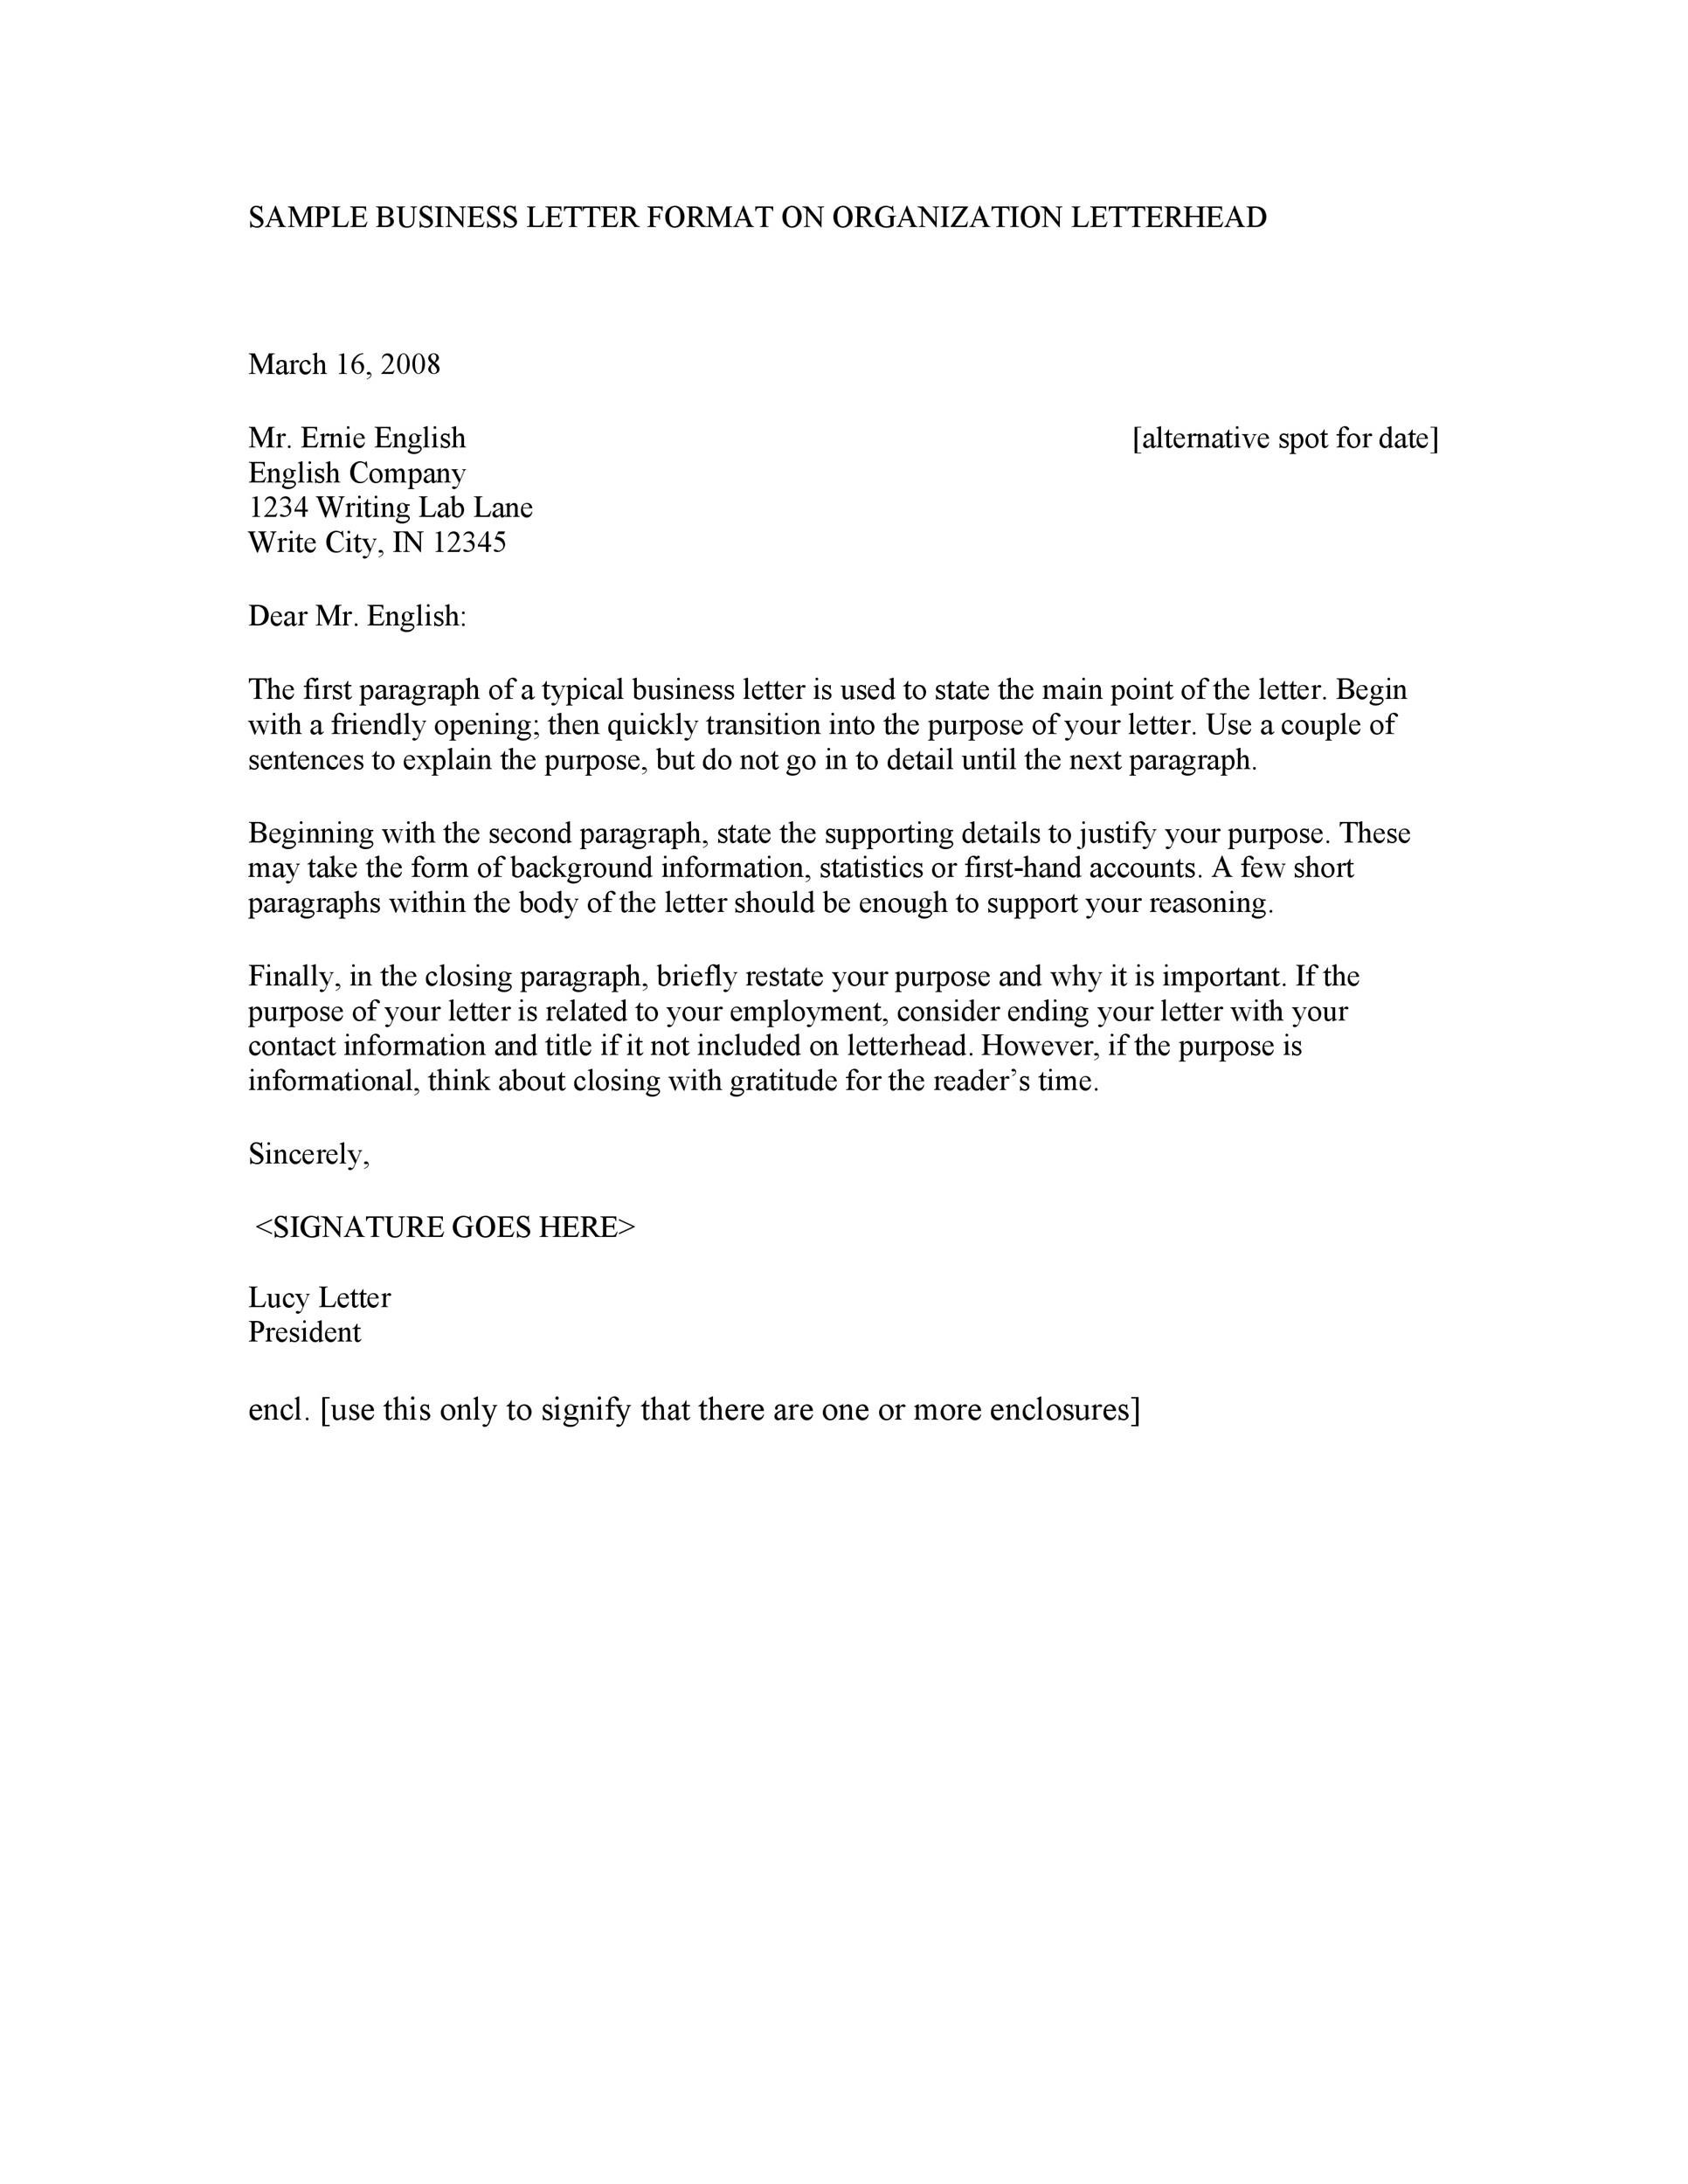 different-styles-of-business-letter-formats